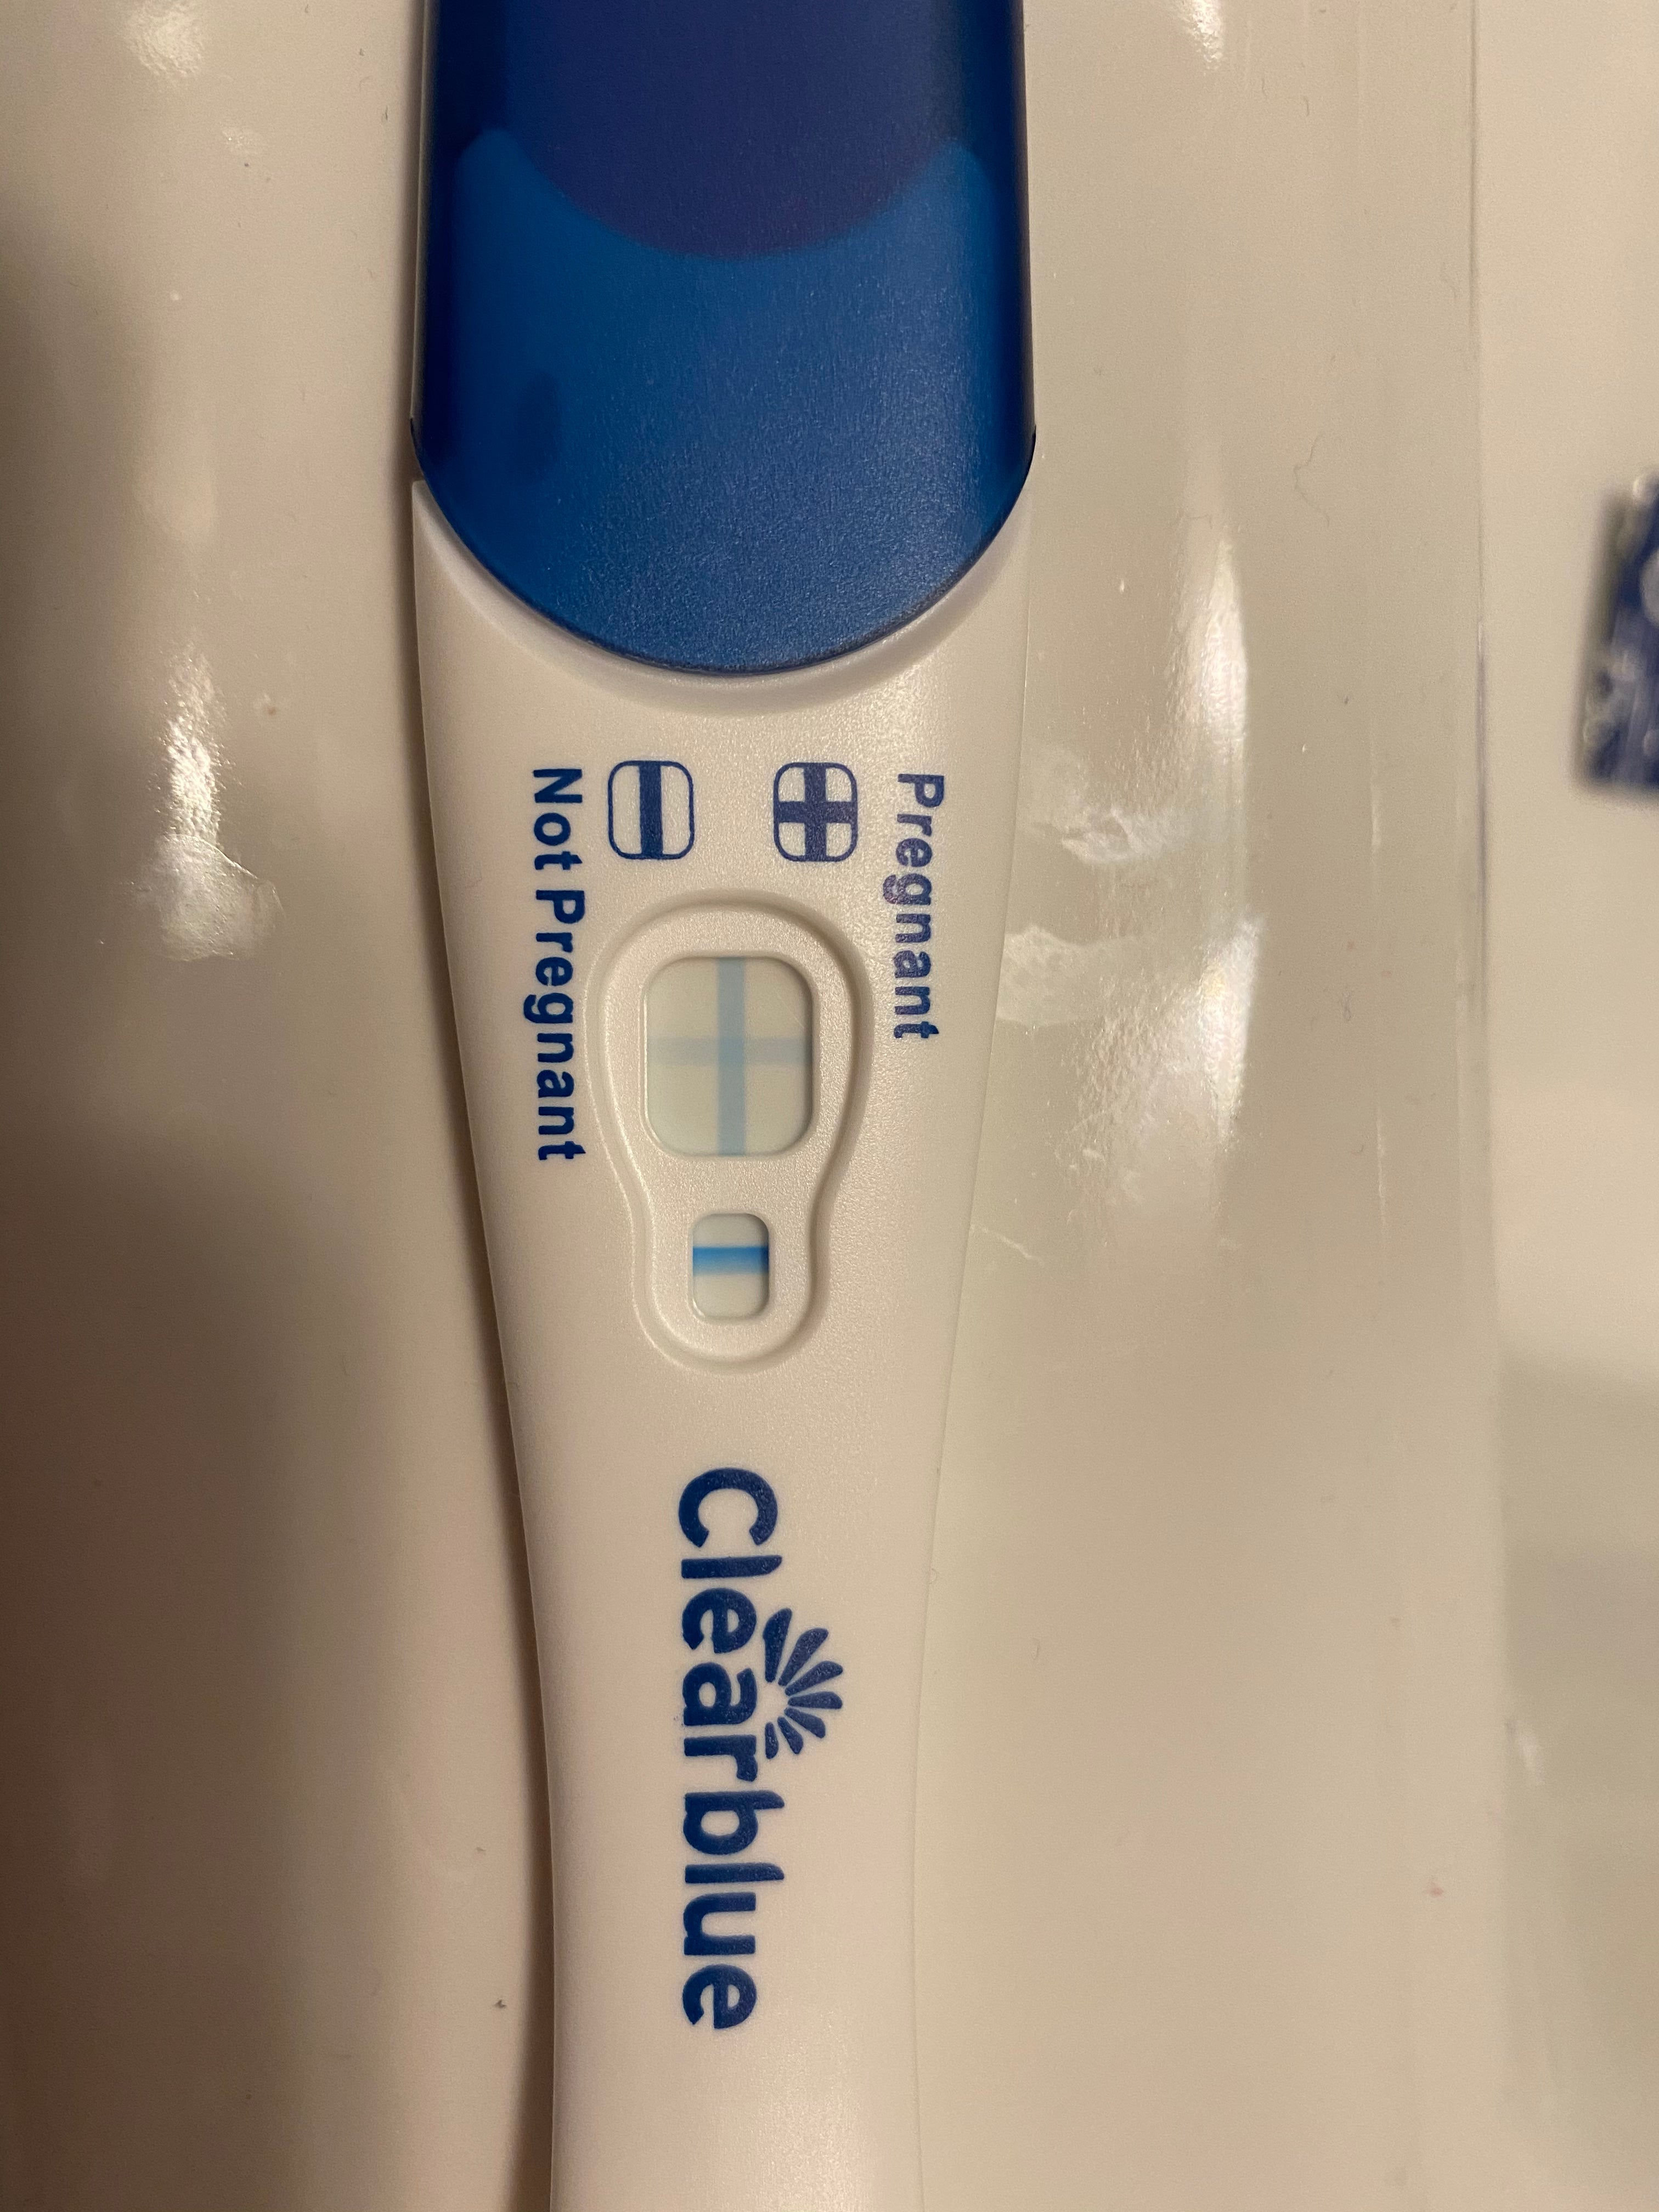 Positive pregnancy test from a new Mosie Family